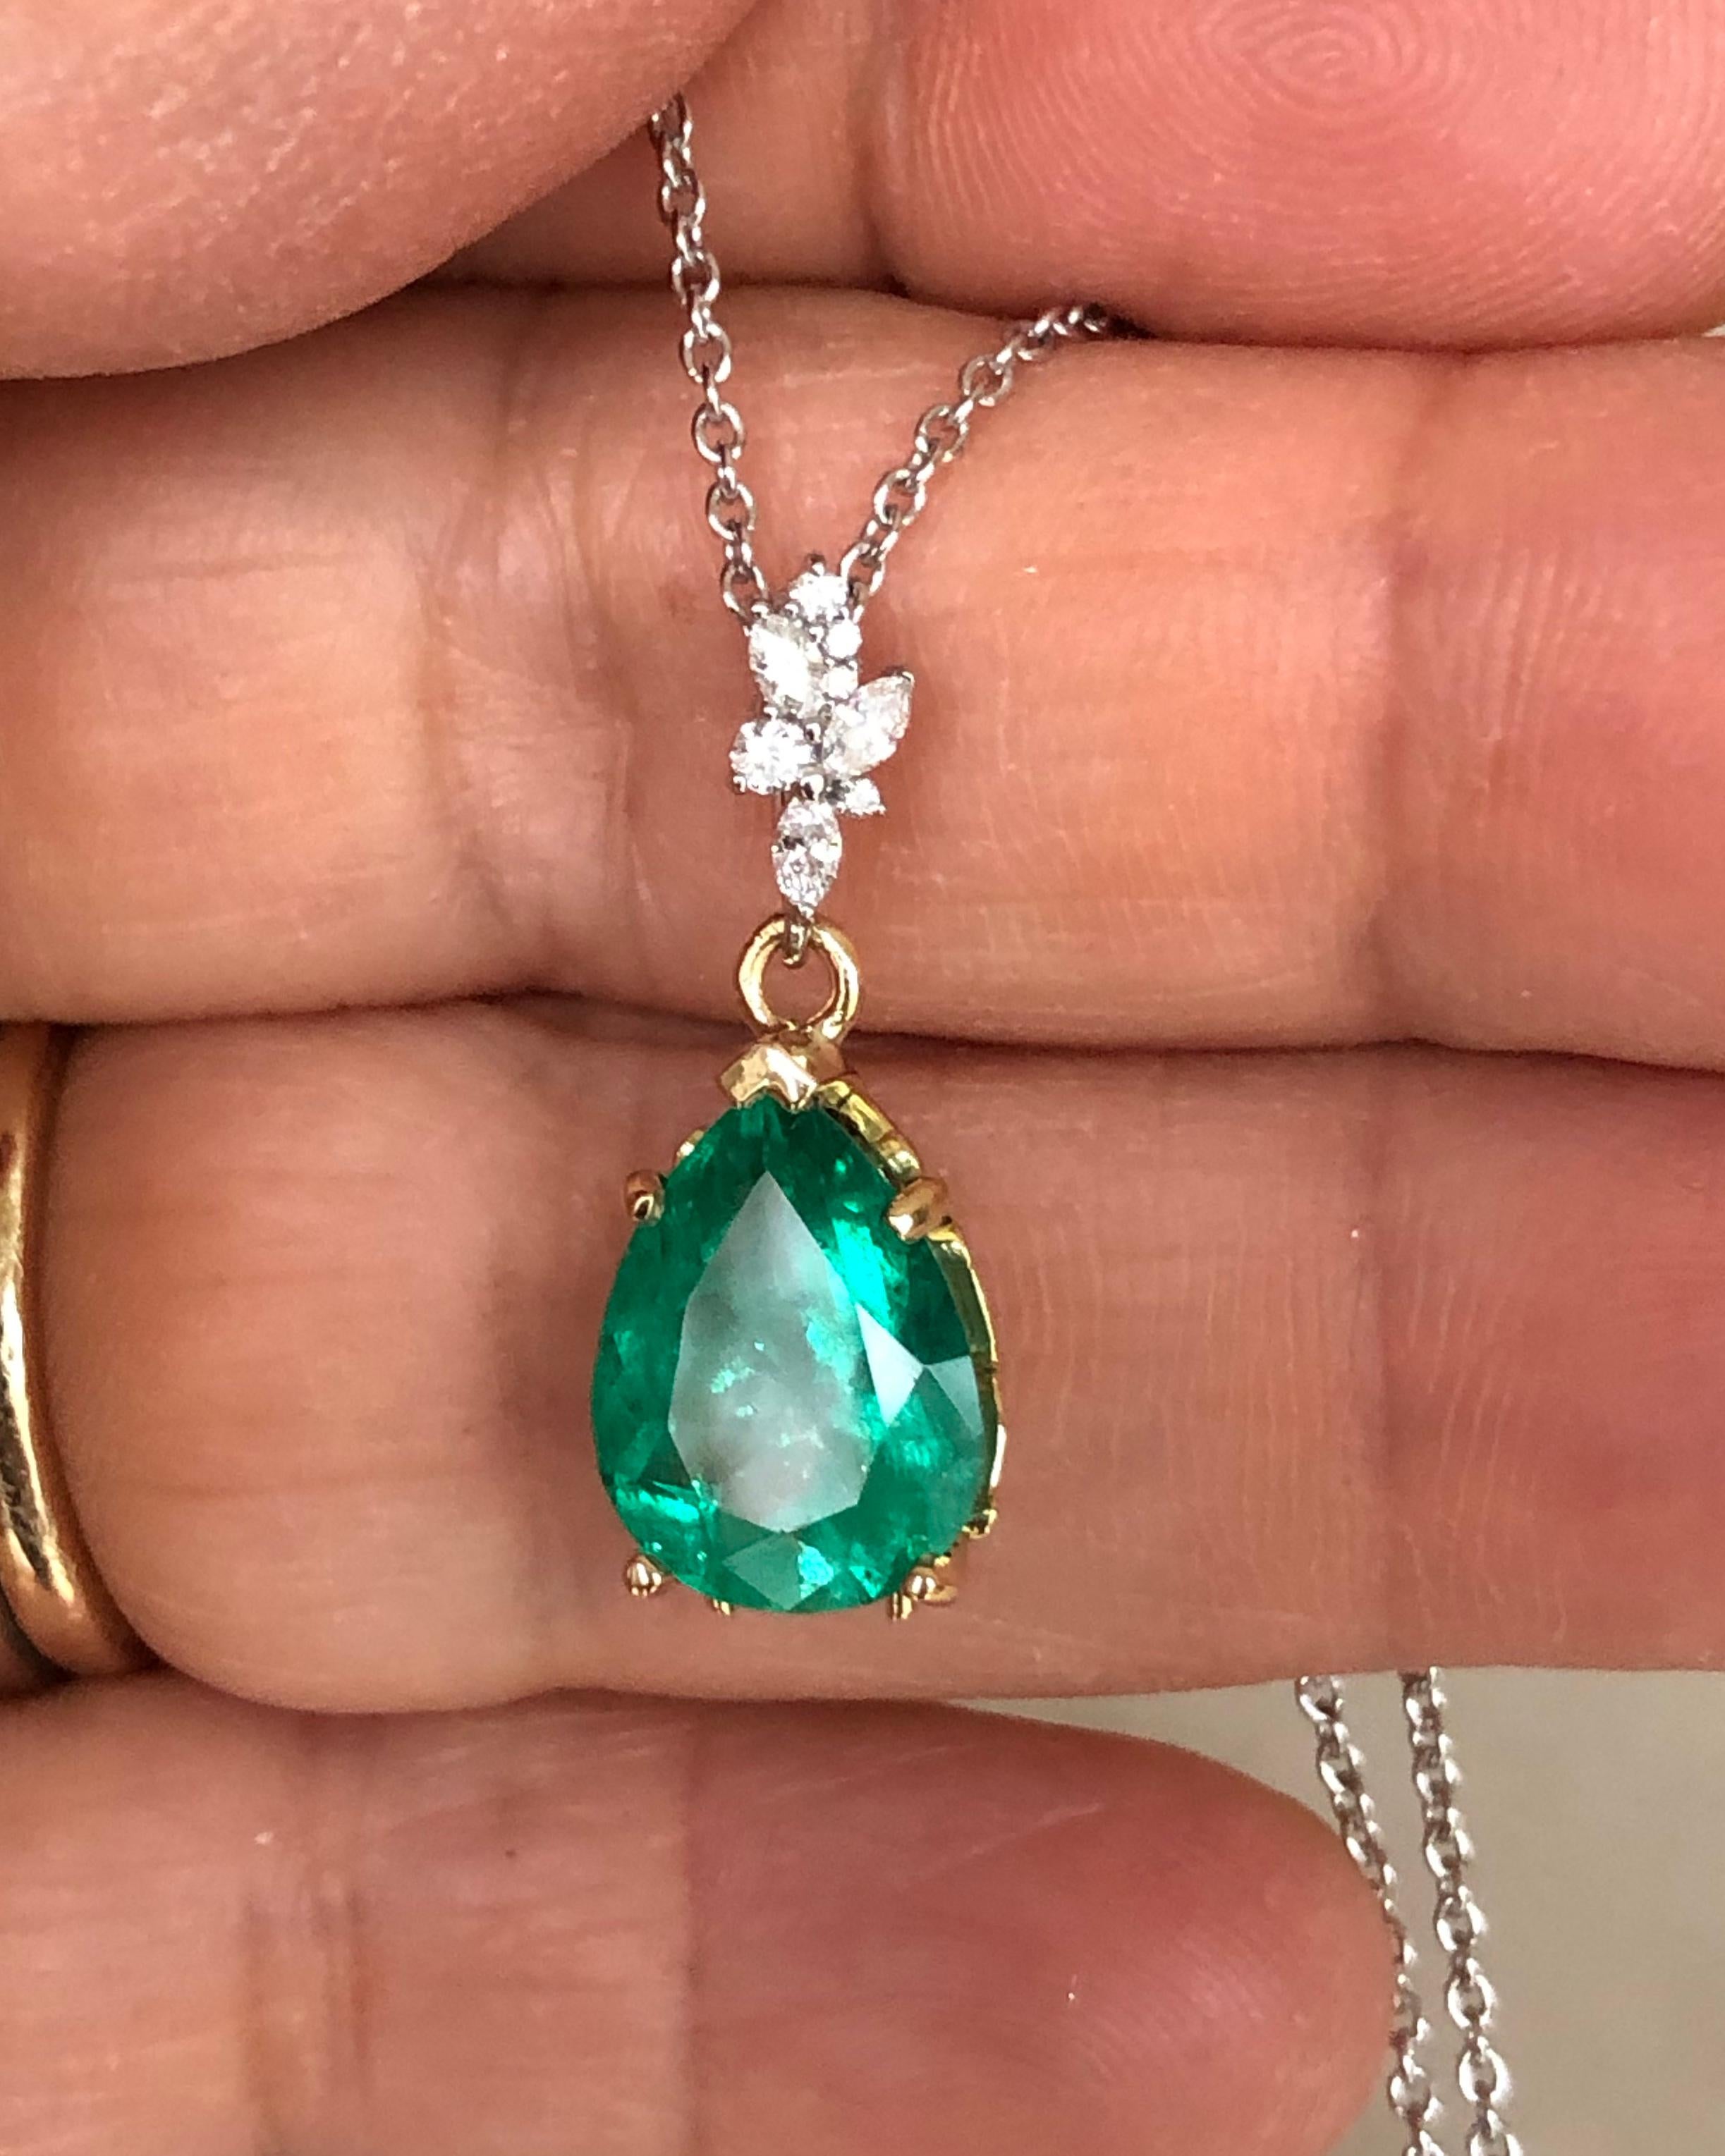 Elegant and Classic Drop Pendant Necklace featuring in the center a fine pear cut Colombian emerald weighing 3.00 carats, minor traditional enhancement. The emerald is set in a beautiful vintage-inspired scroll 18K yellow gold setting suspended by a